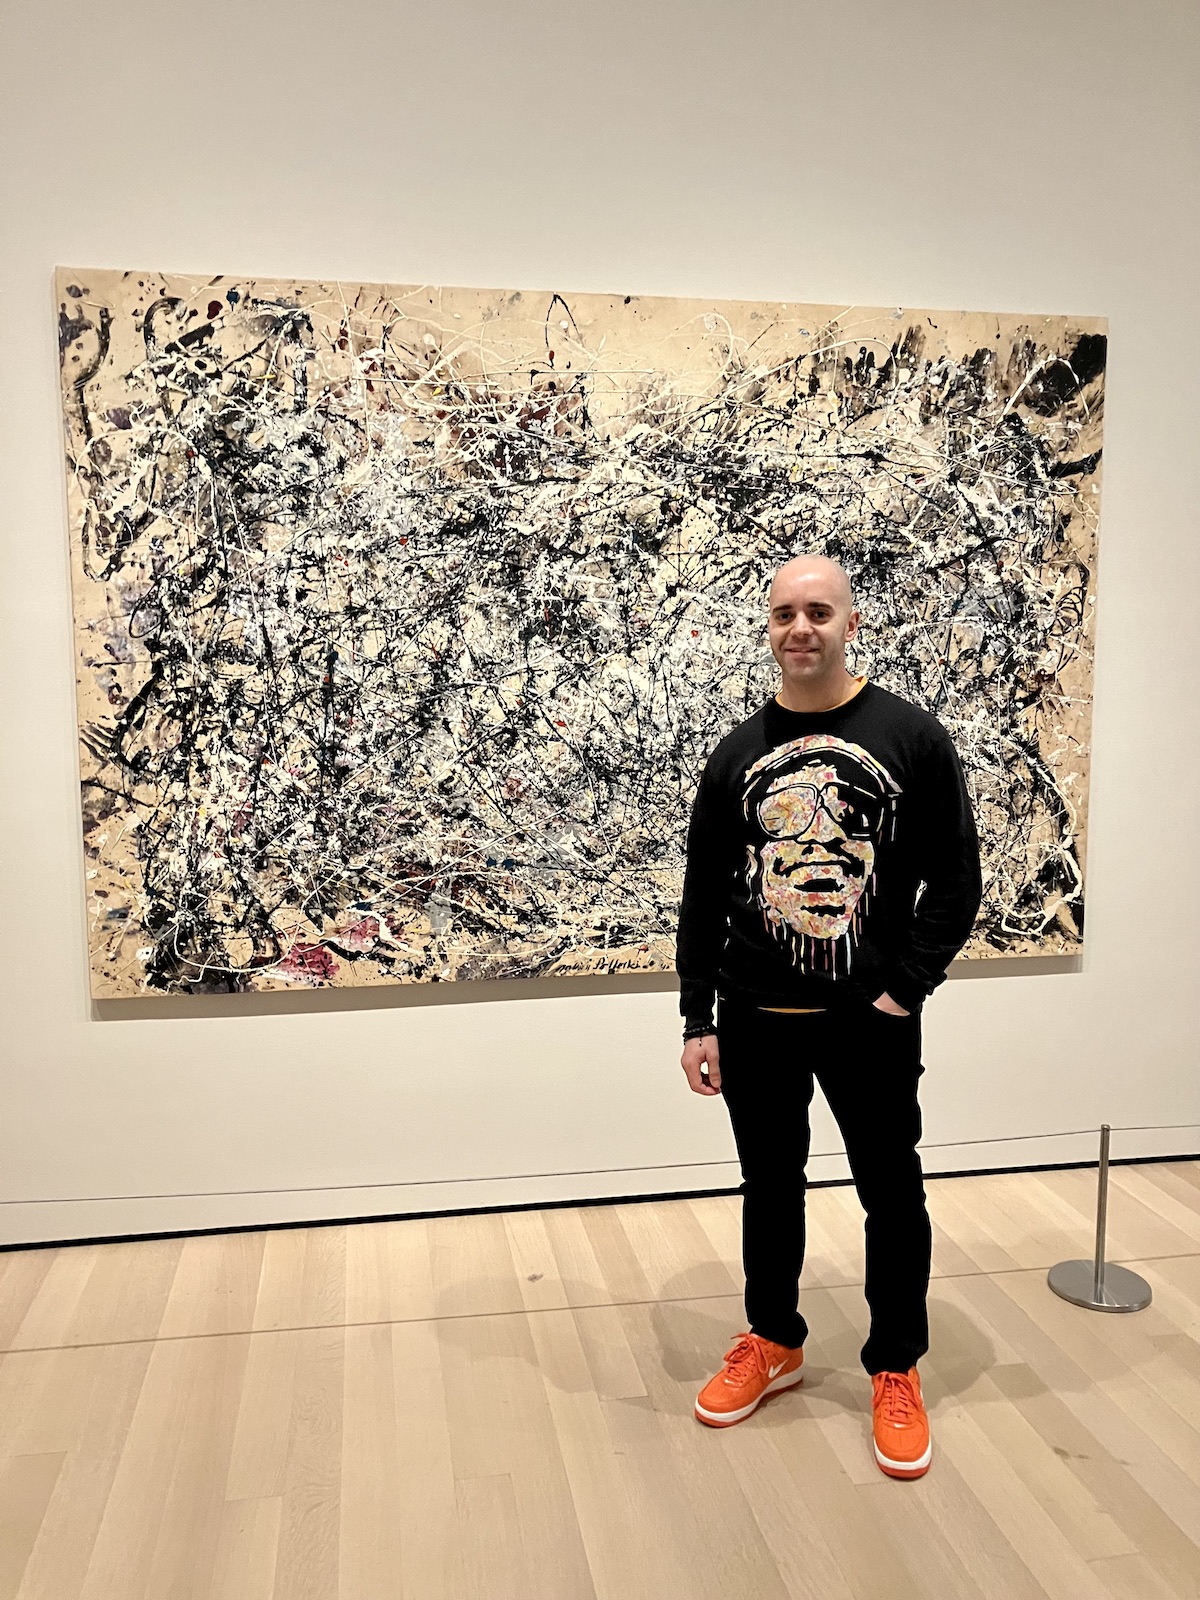 Kerwin next to Jackson Pollock painting, Number 1A, 1948, at the Museum of Modern Art, New York